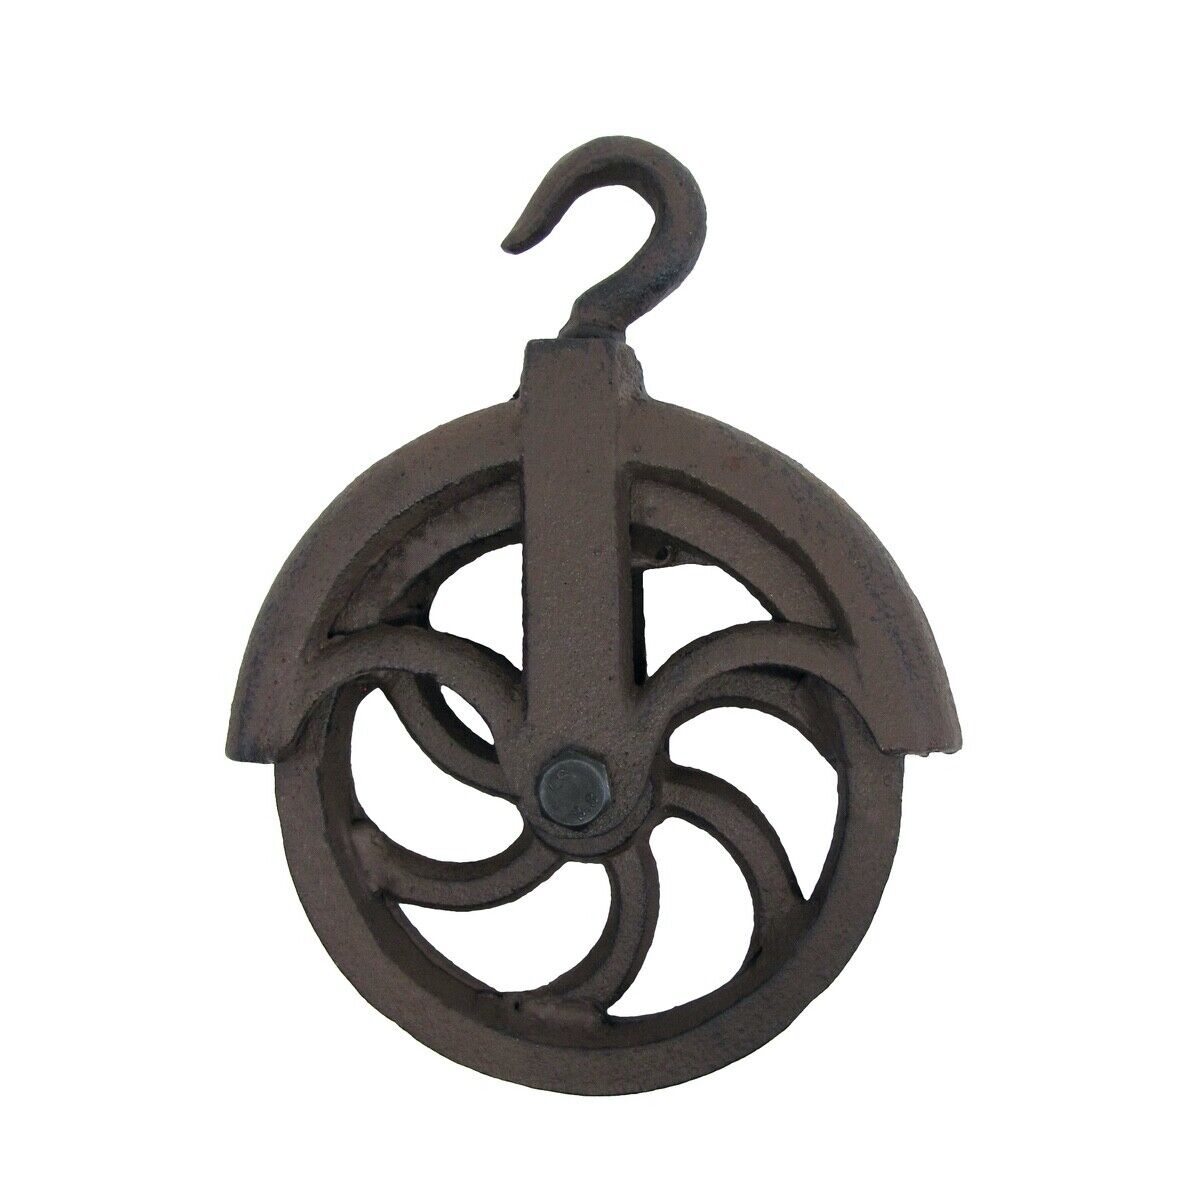 Rustic Cast Iron Hanging Cable Pulley Wheel Hook Farmhouse Country Home Decor